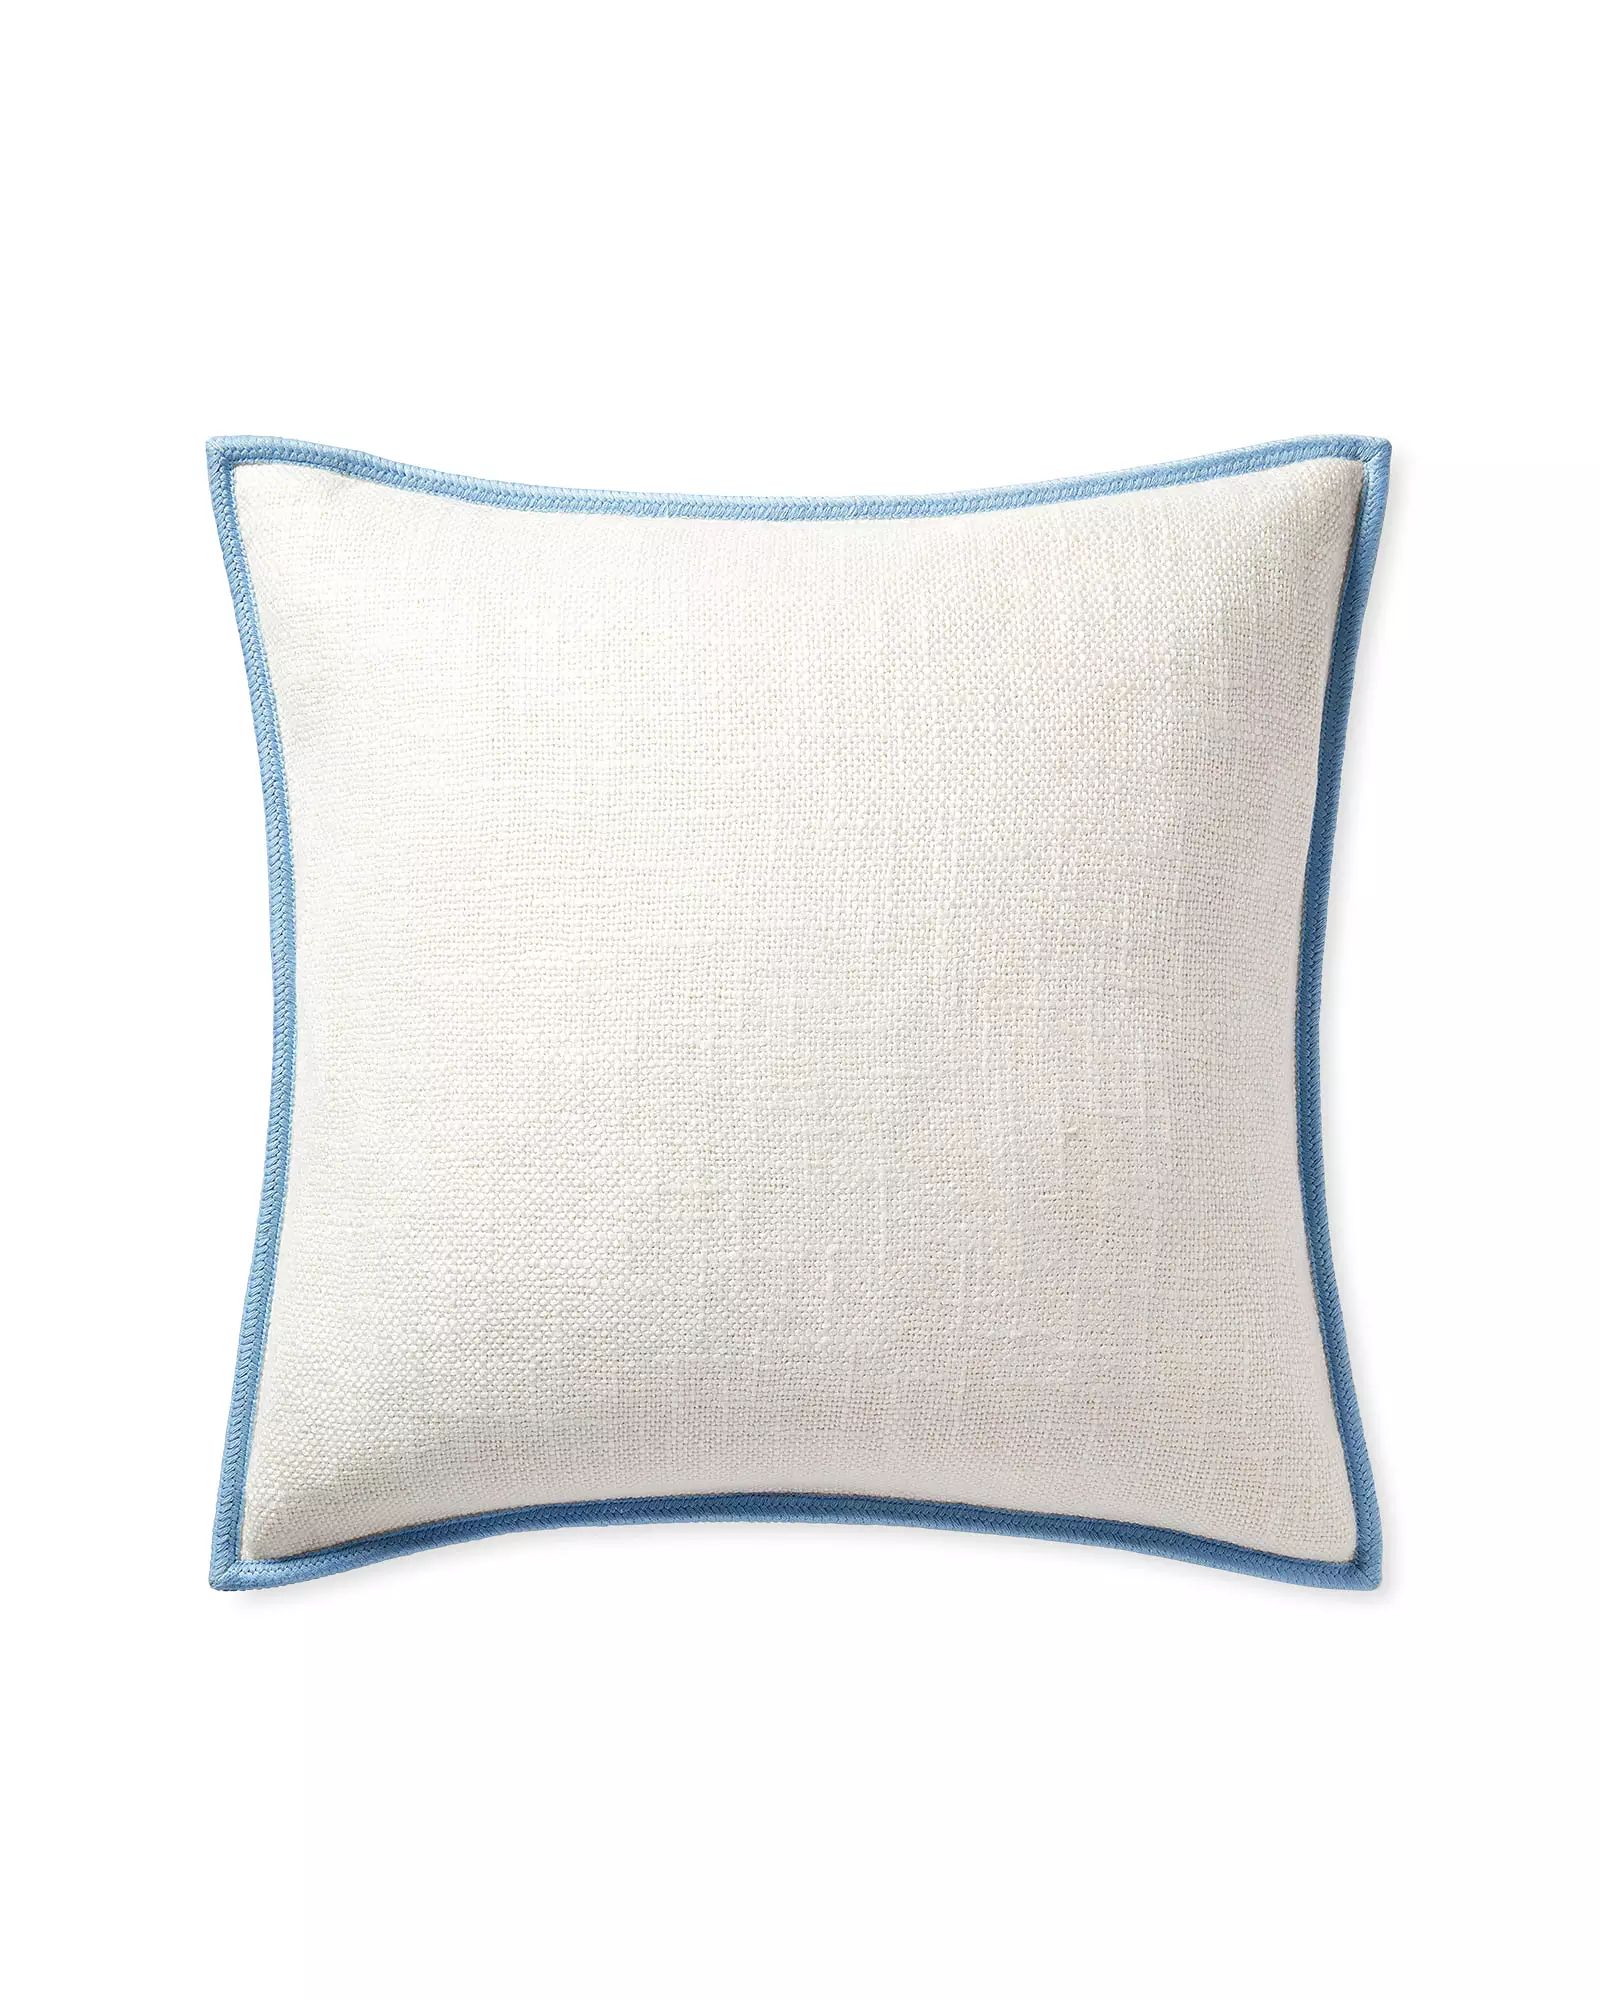 Easton Pillow Cover | Serena and Lily